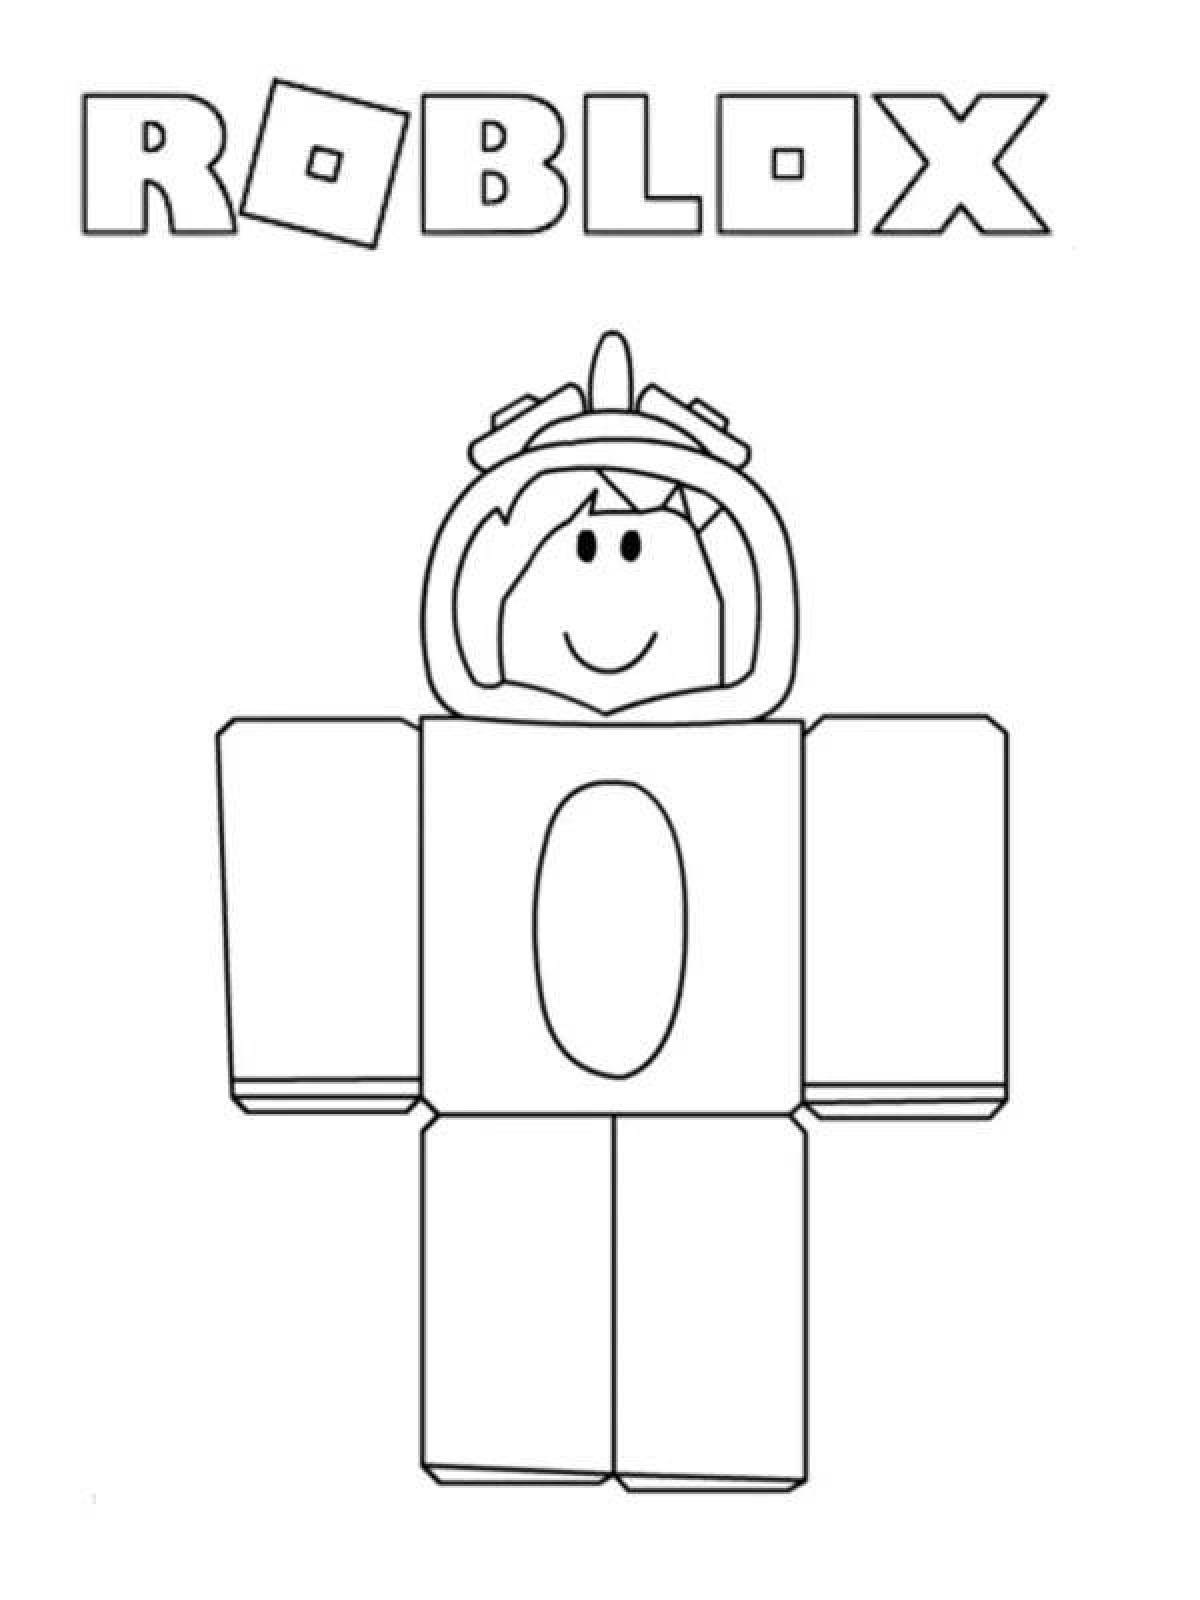 Roblox color dynamic face coloring page